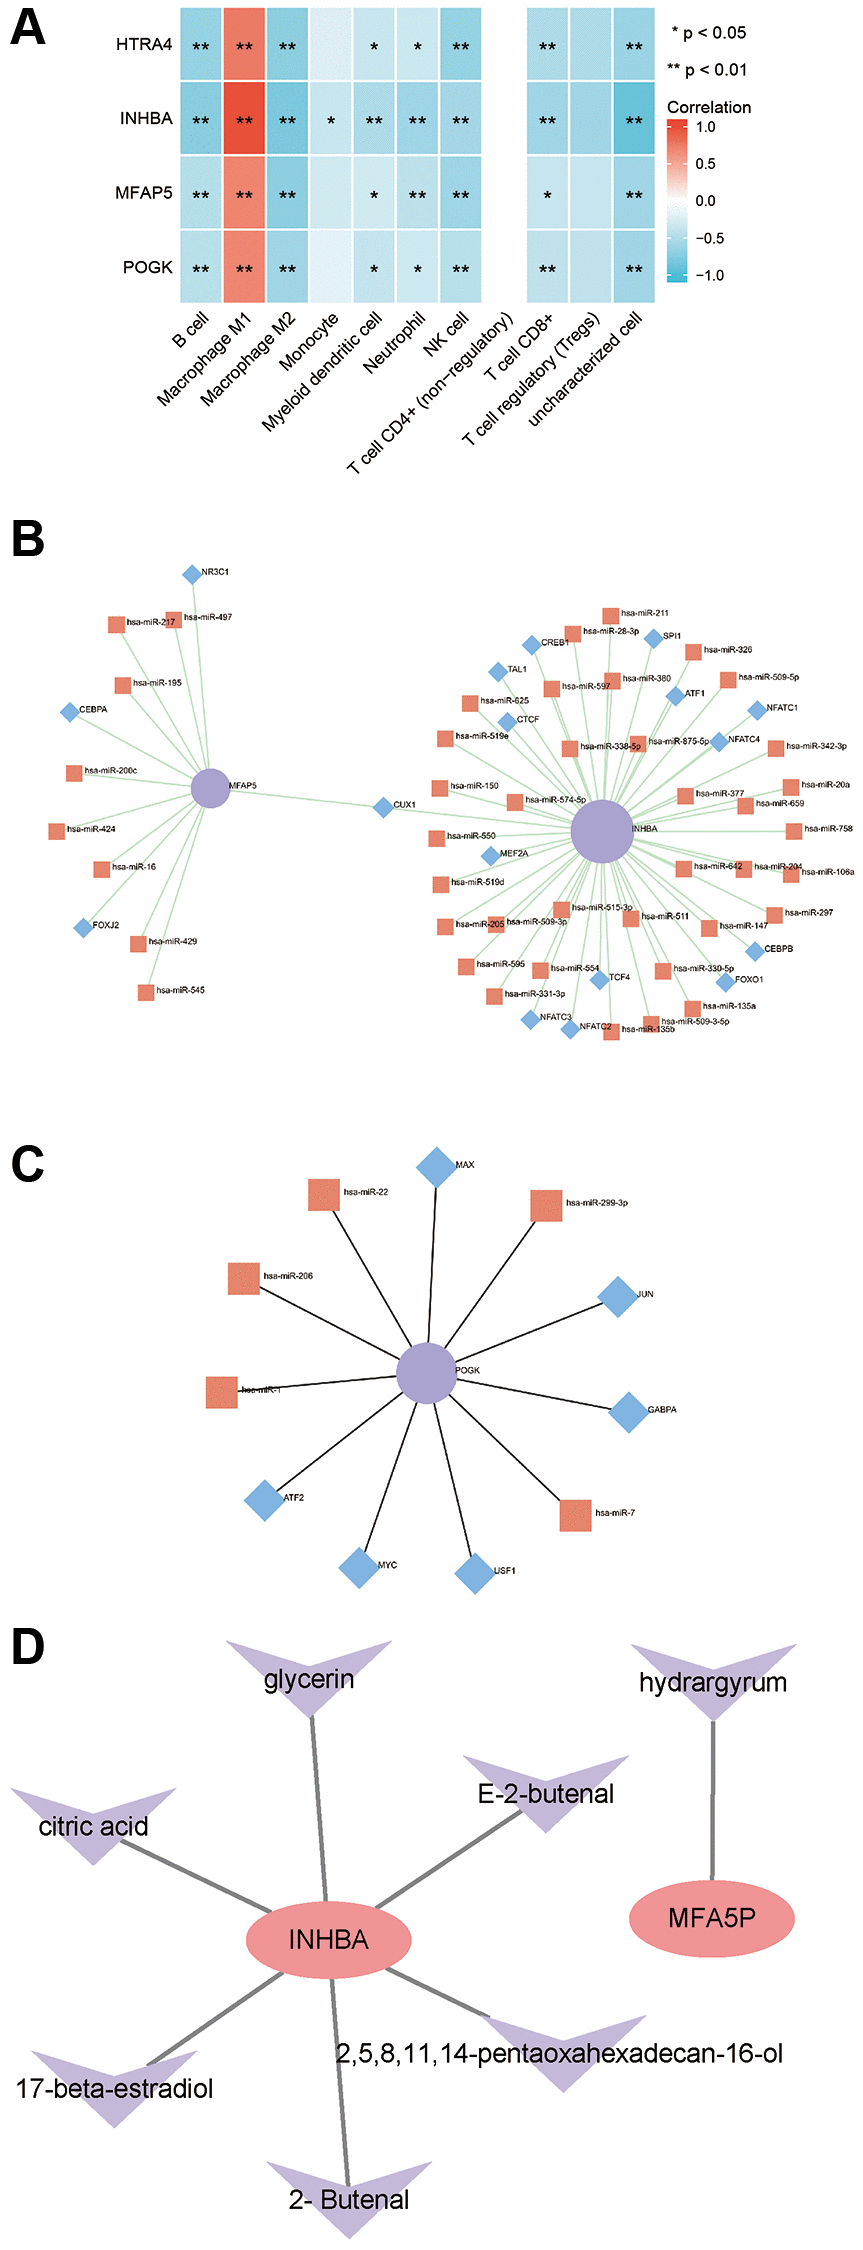 Correlation between hub proteins and immune infiltration and regulatory network. (A) Correlation analysis of hub genes with immune infiltration. (B) miRNA/TF regulatory network of MFAP5 and INHBA. (C) miRNA/TF regulatory network of POGK. (D) Traditional Chinese medicine monomer-target protein regulatory network of MFAP5 and INHBA.